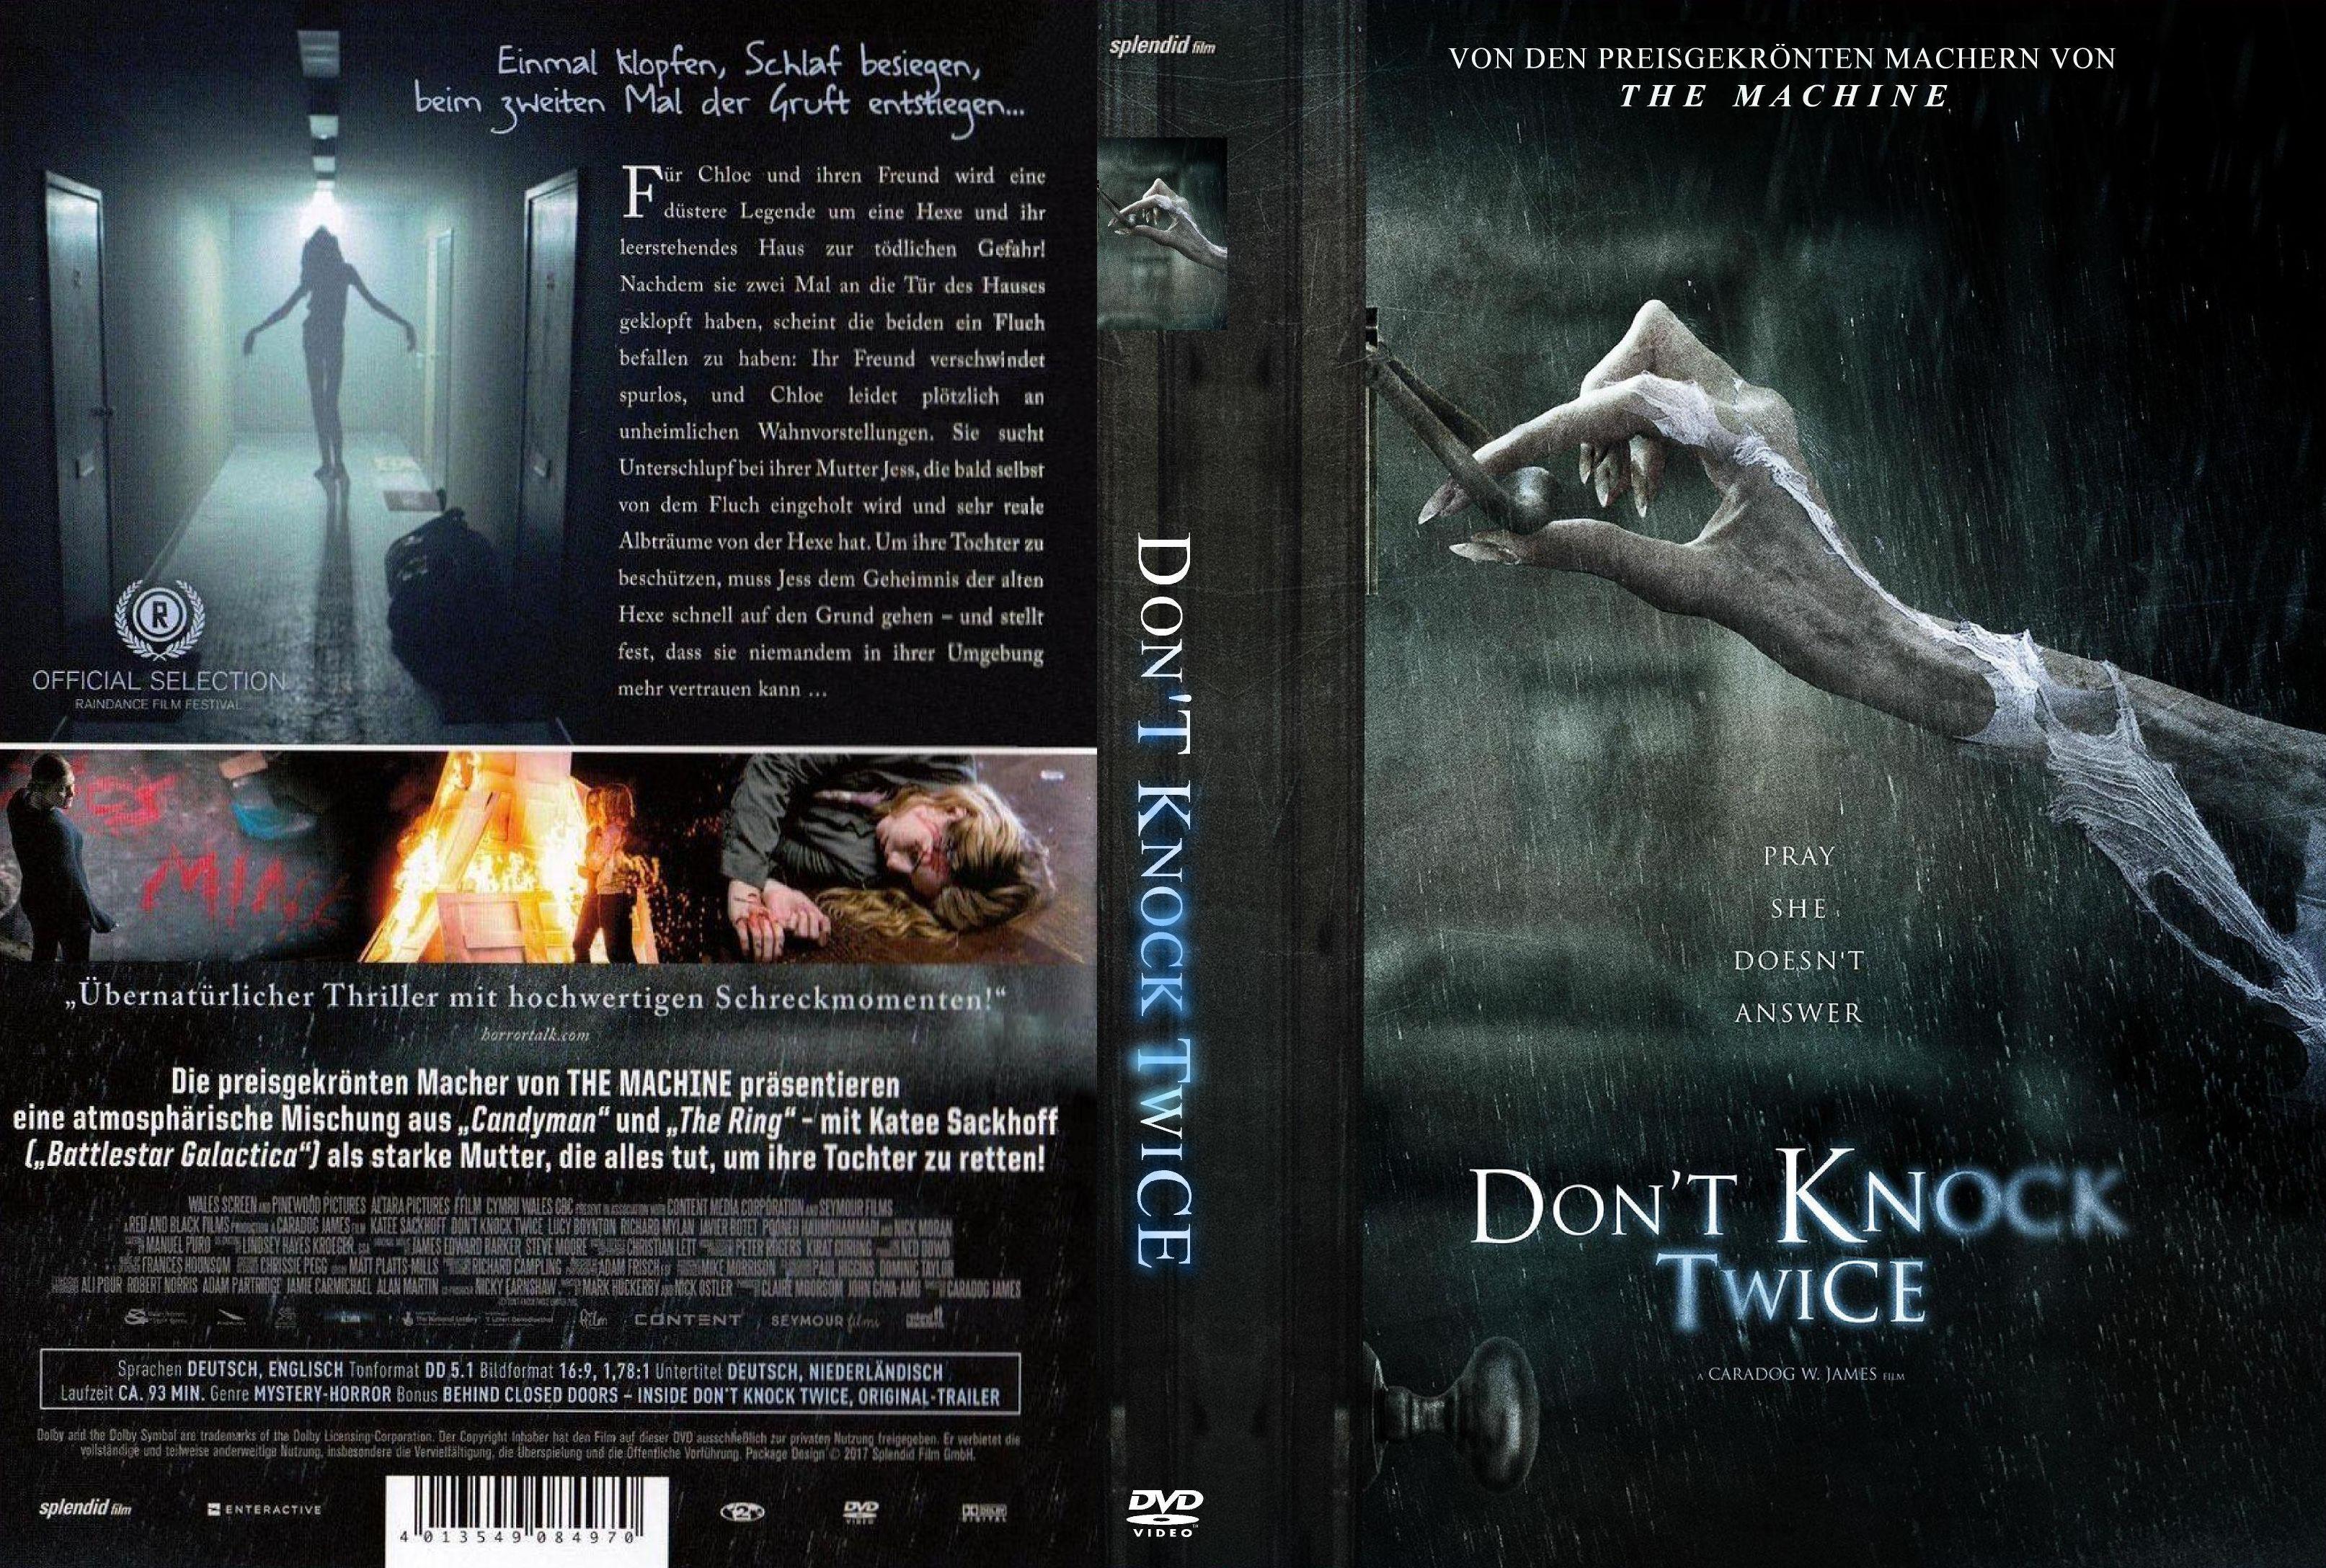 Dont Knock Twice German DVD Covers.